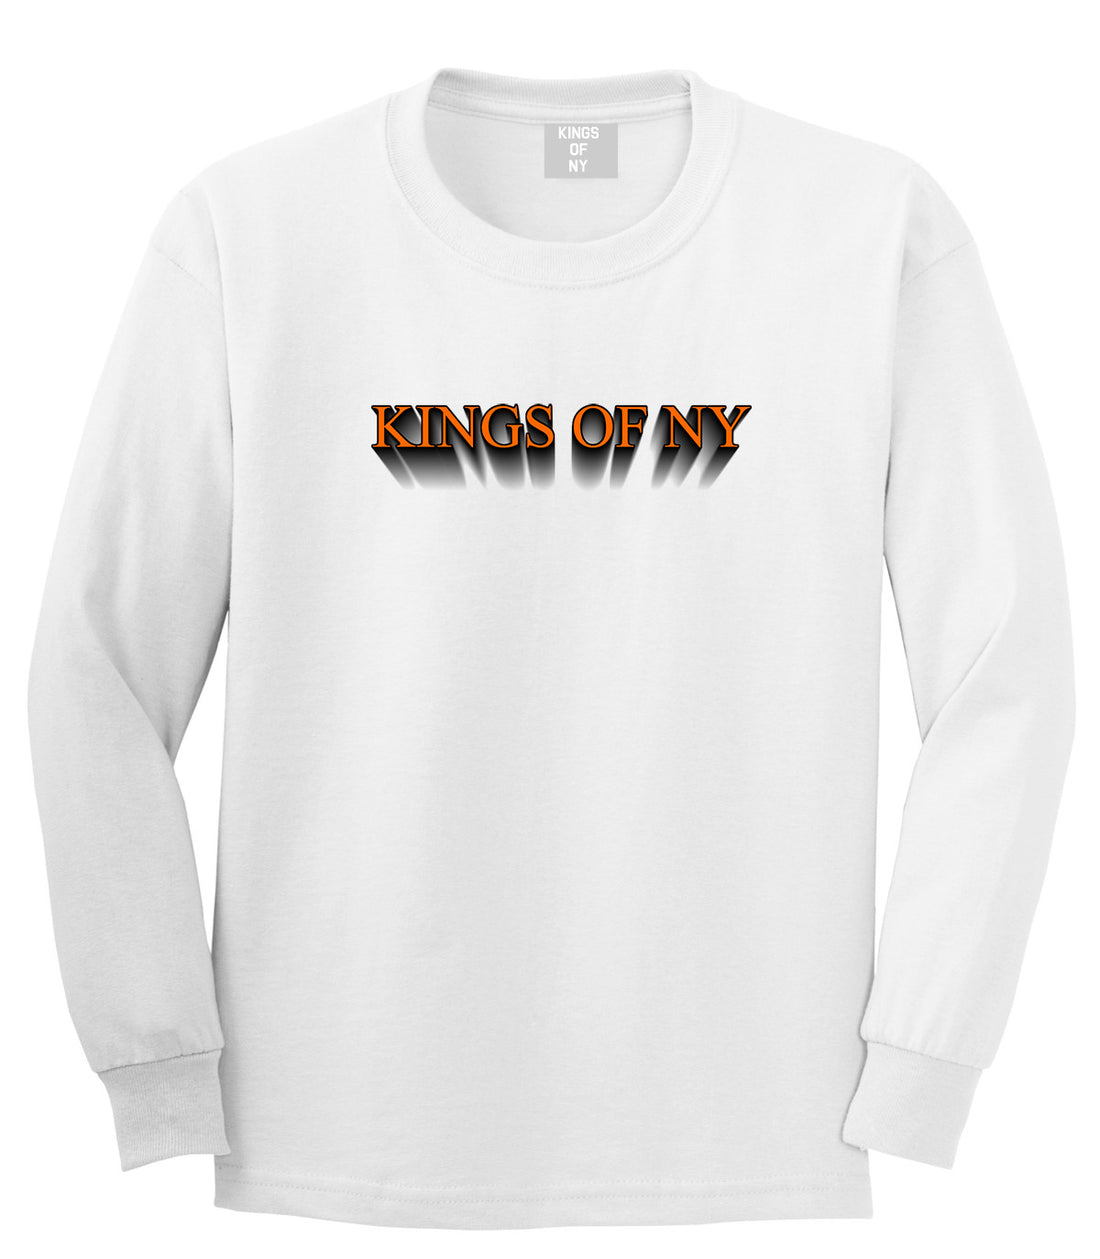 3D Text Long Sleeve T-Shirt in White